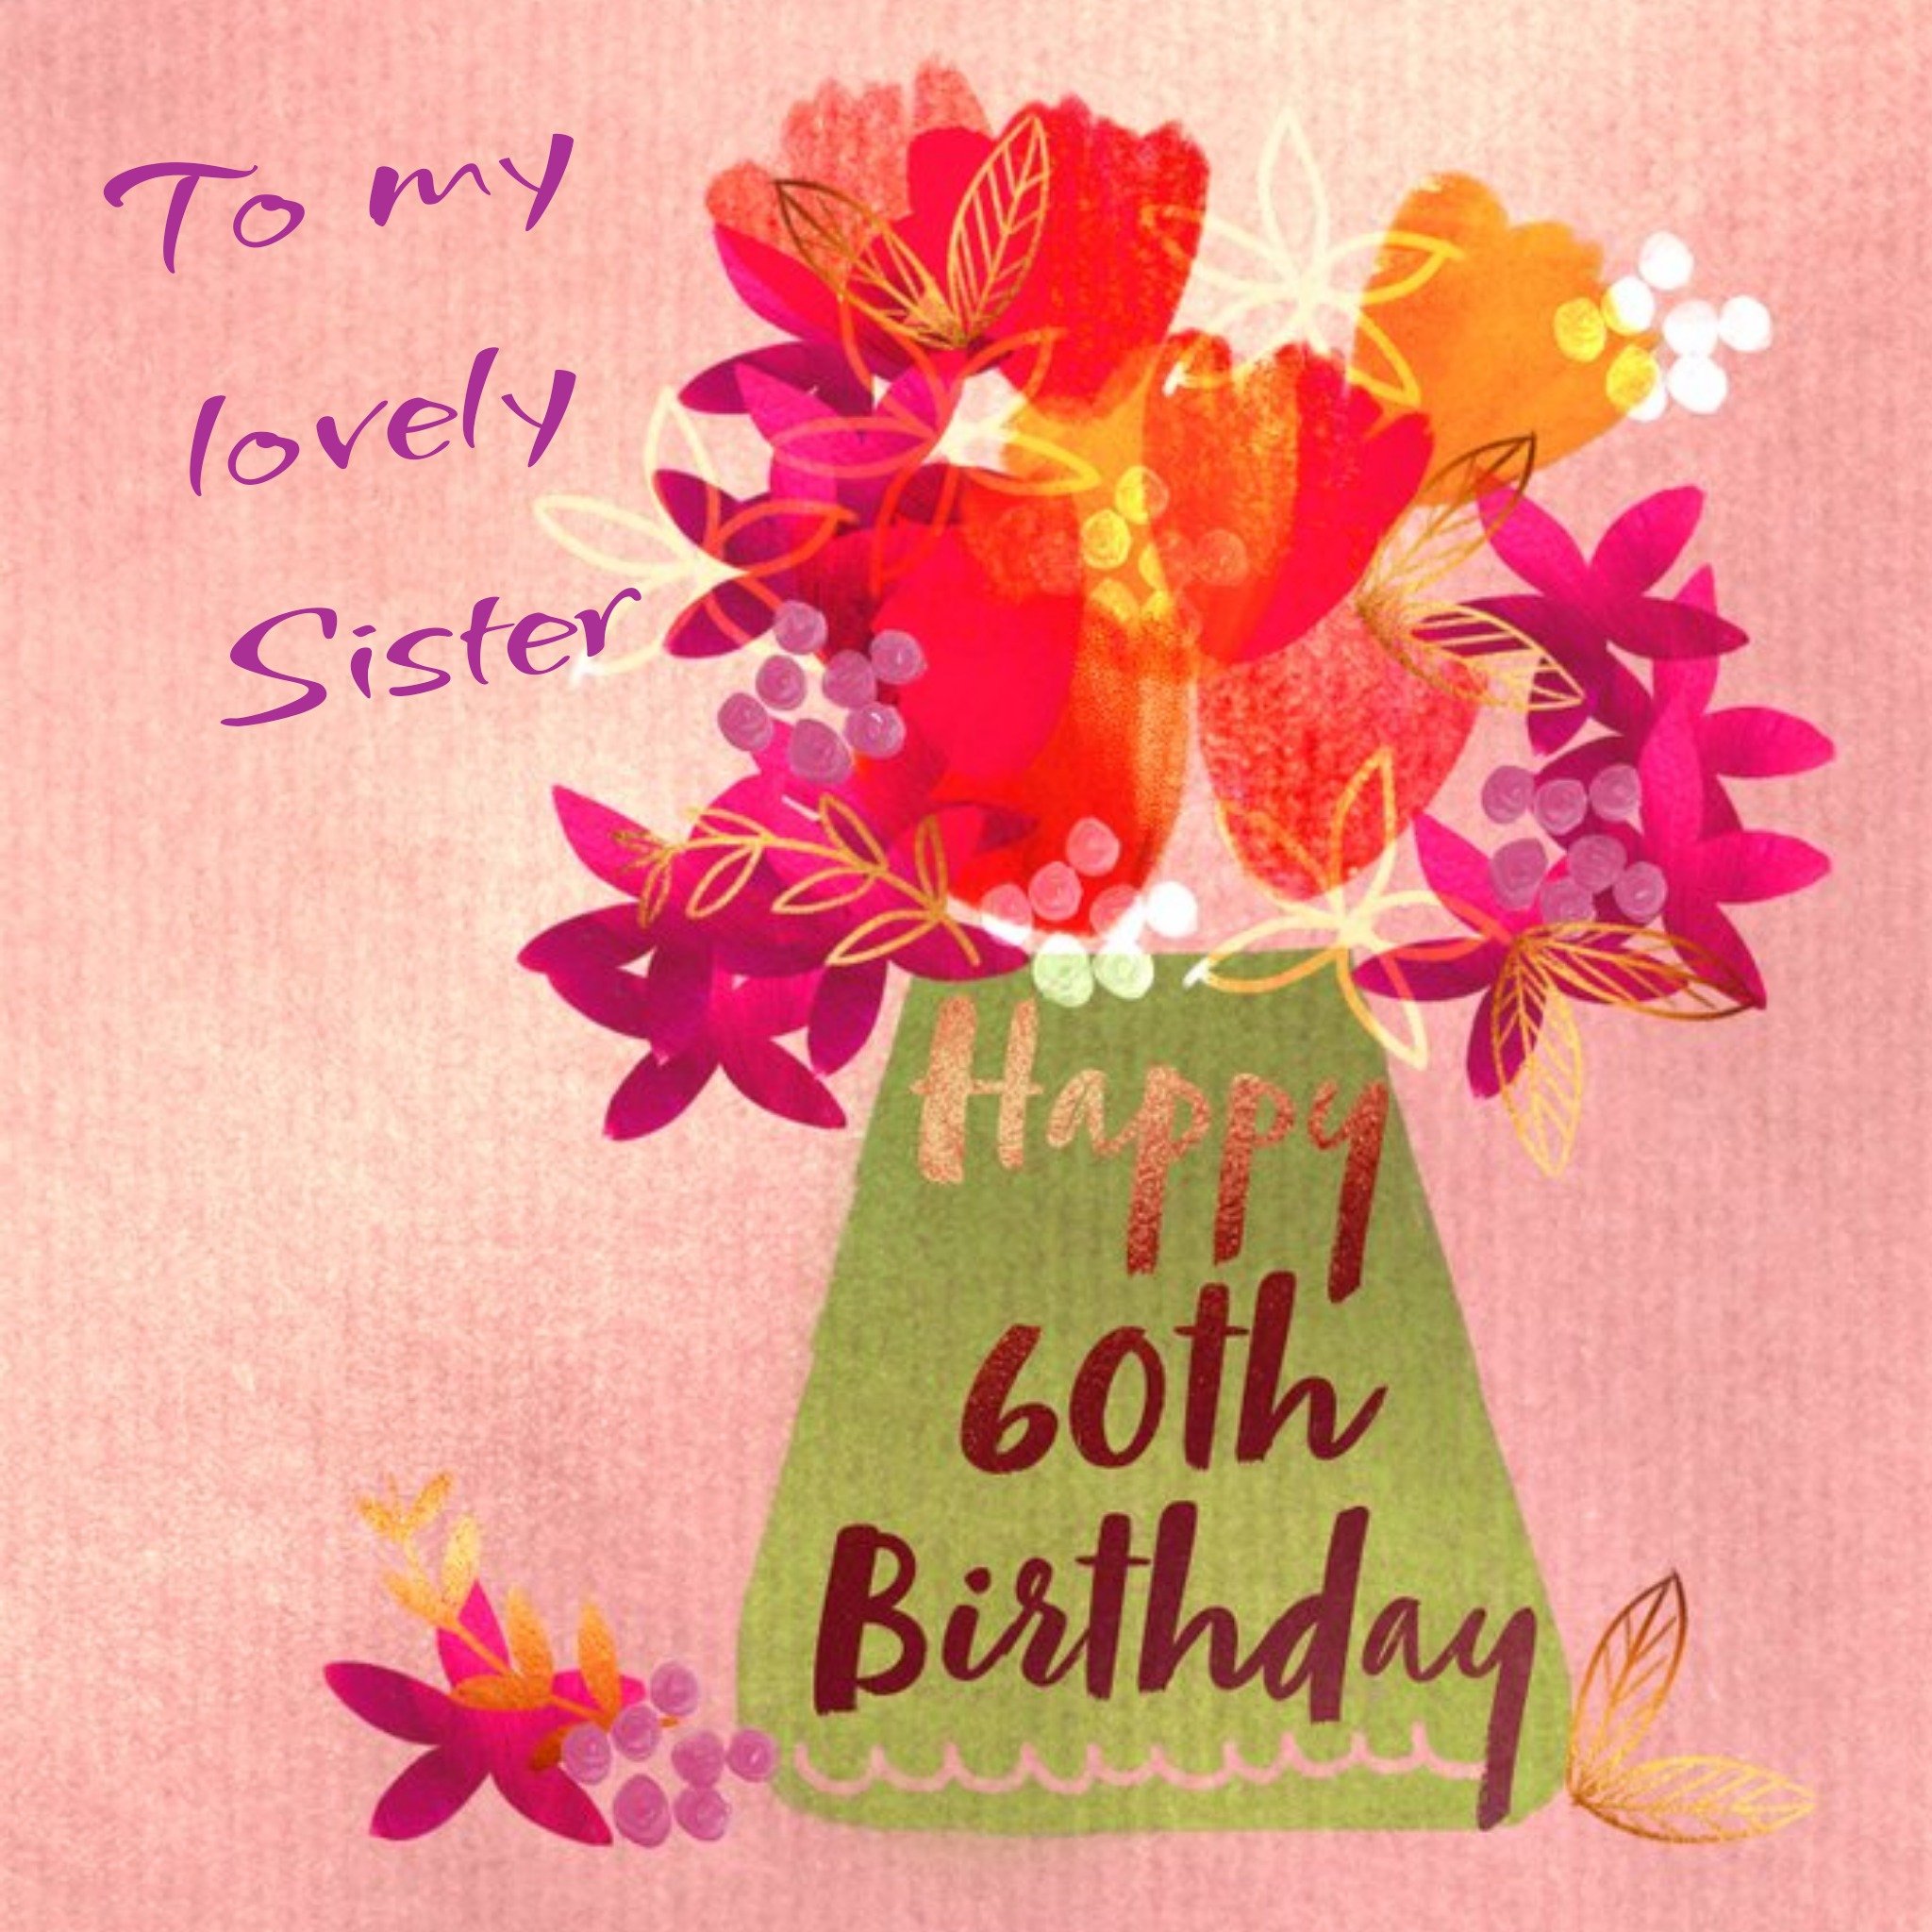 Moonpig Flowers To My Lovely Sister Happy 60th Birthday Card, Square